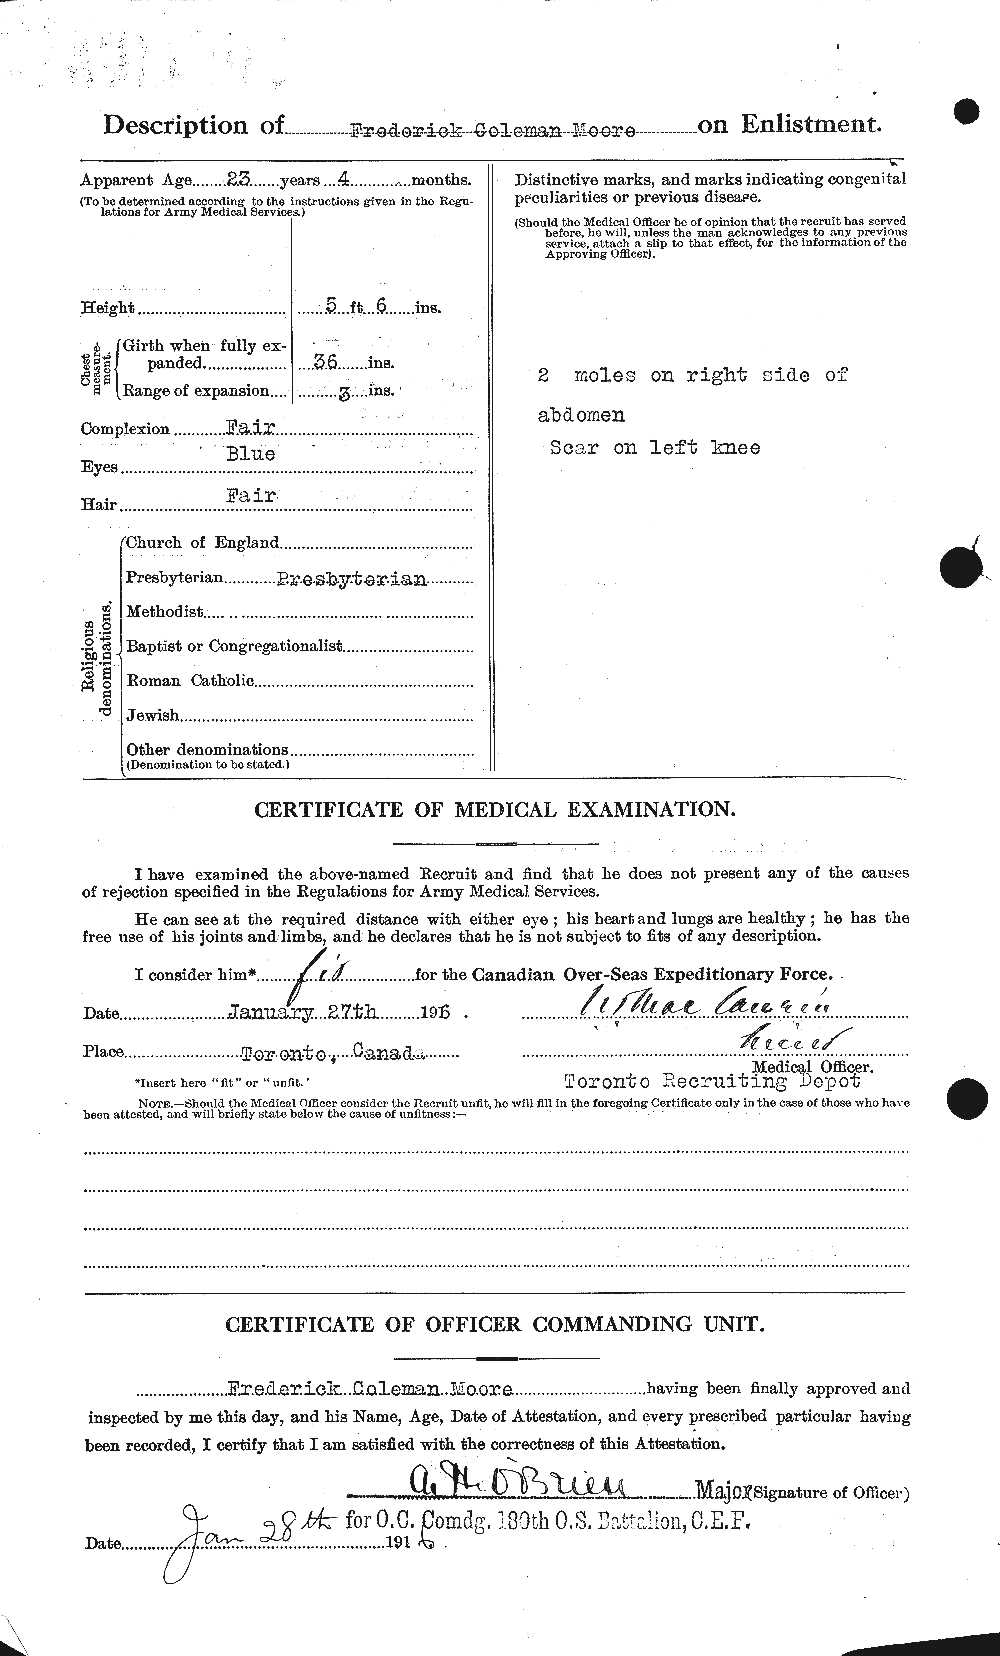 Personnel Records of the First World War - CEF 506745b